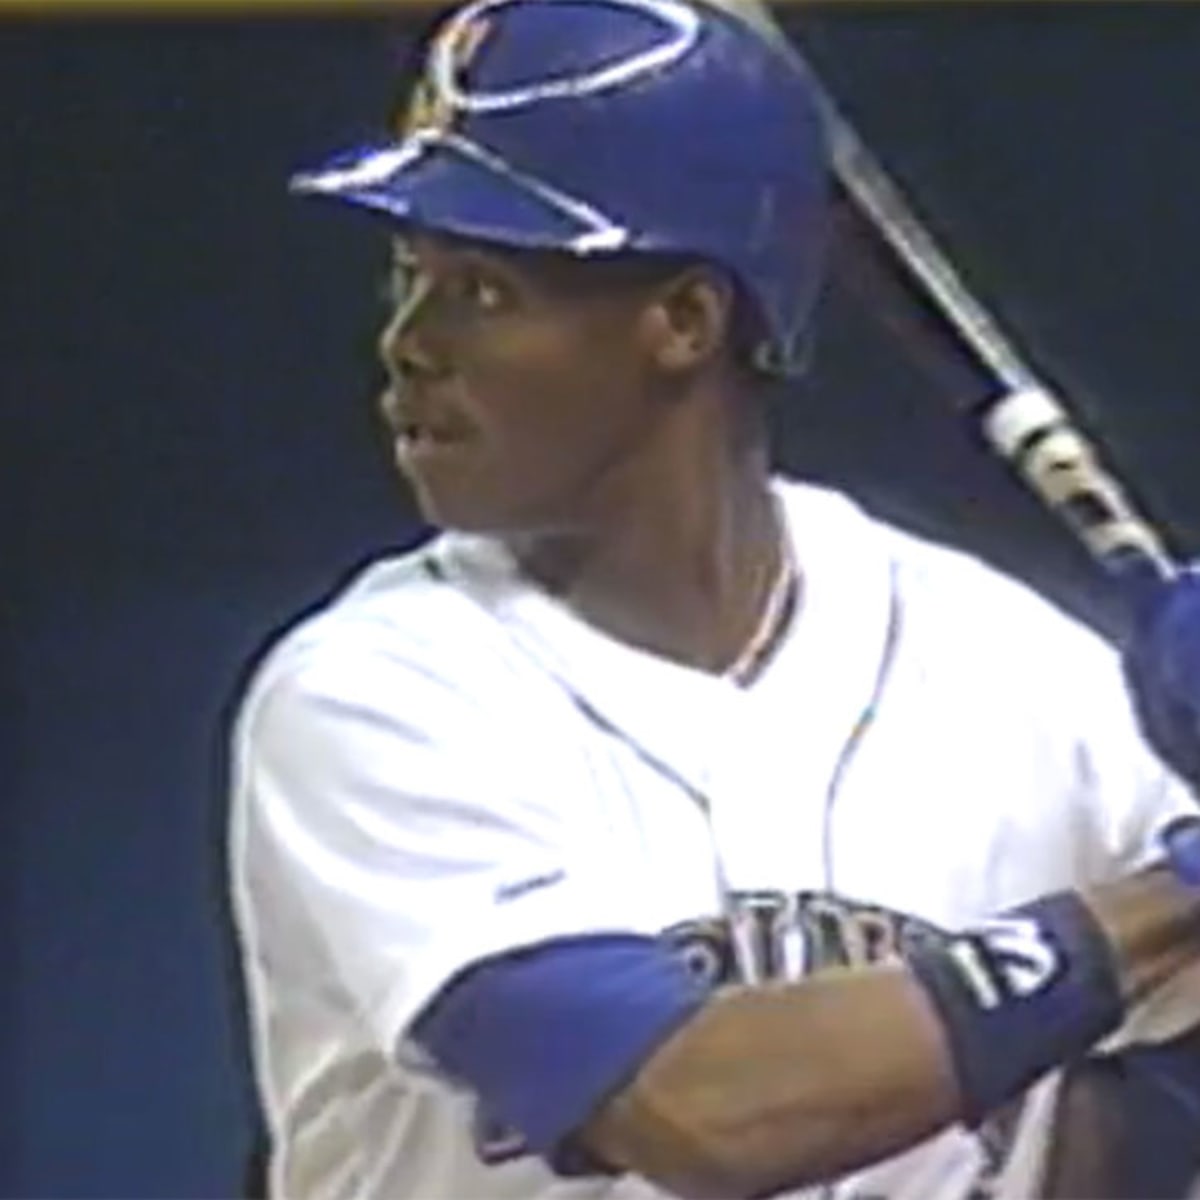 Griffey back with a swing in his step